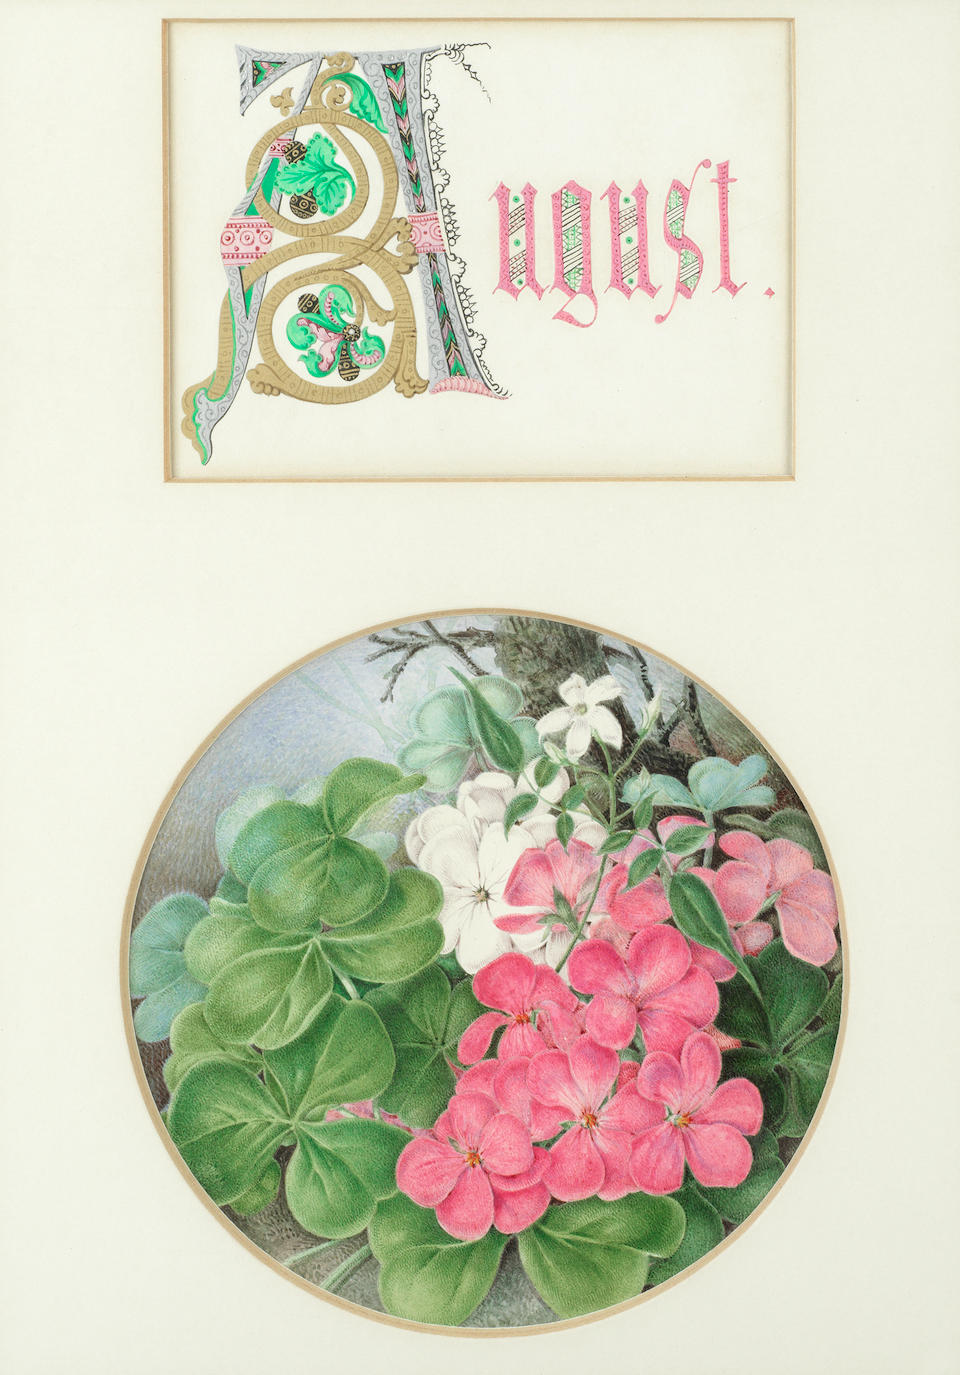 Attributed to Catherine Stringar Beckett (British, late 19th/ early 20th century) The months of the year illustrated in floral still lifes 30.5 x 21.6cm (12 x 8 1/2in)(mounted area at widest point).(12)